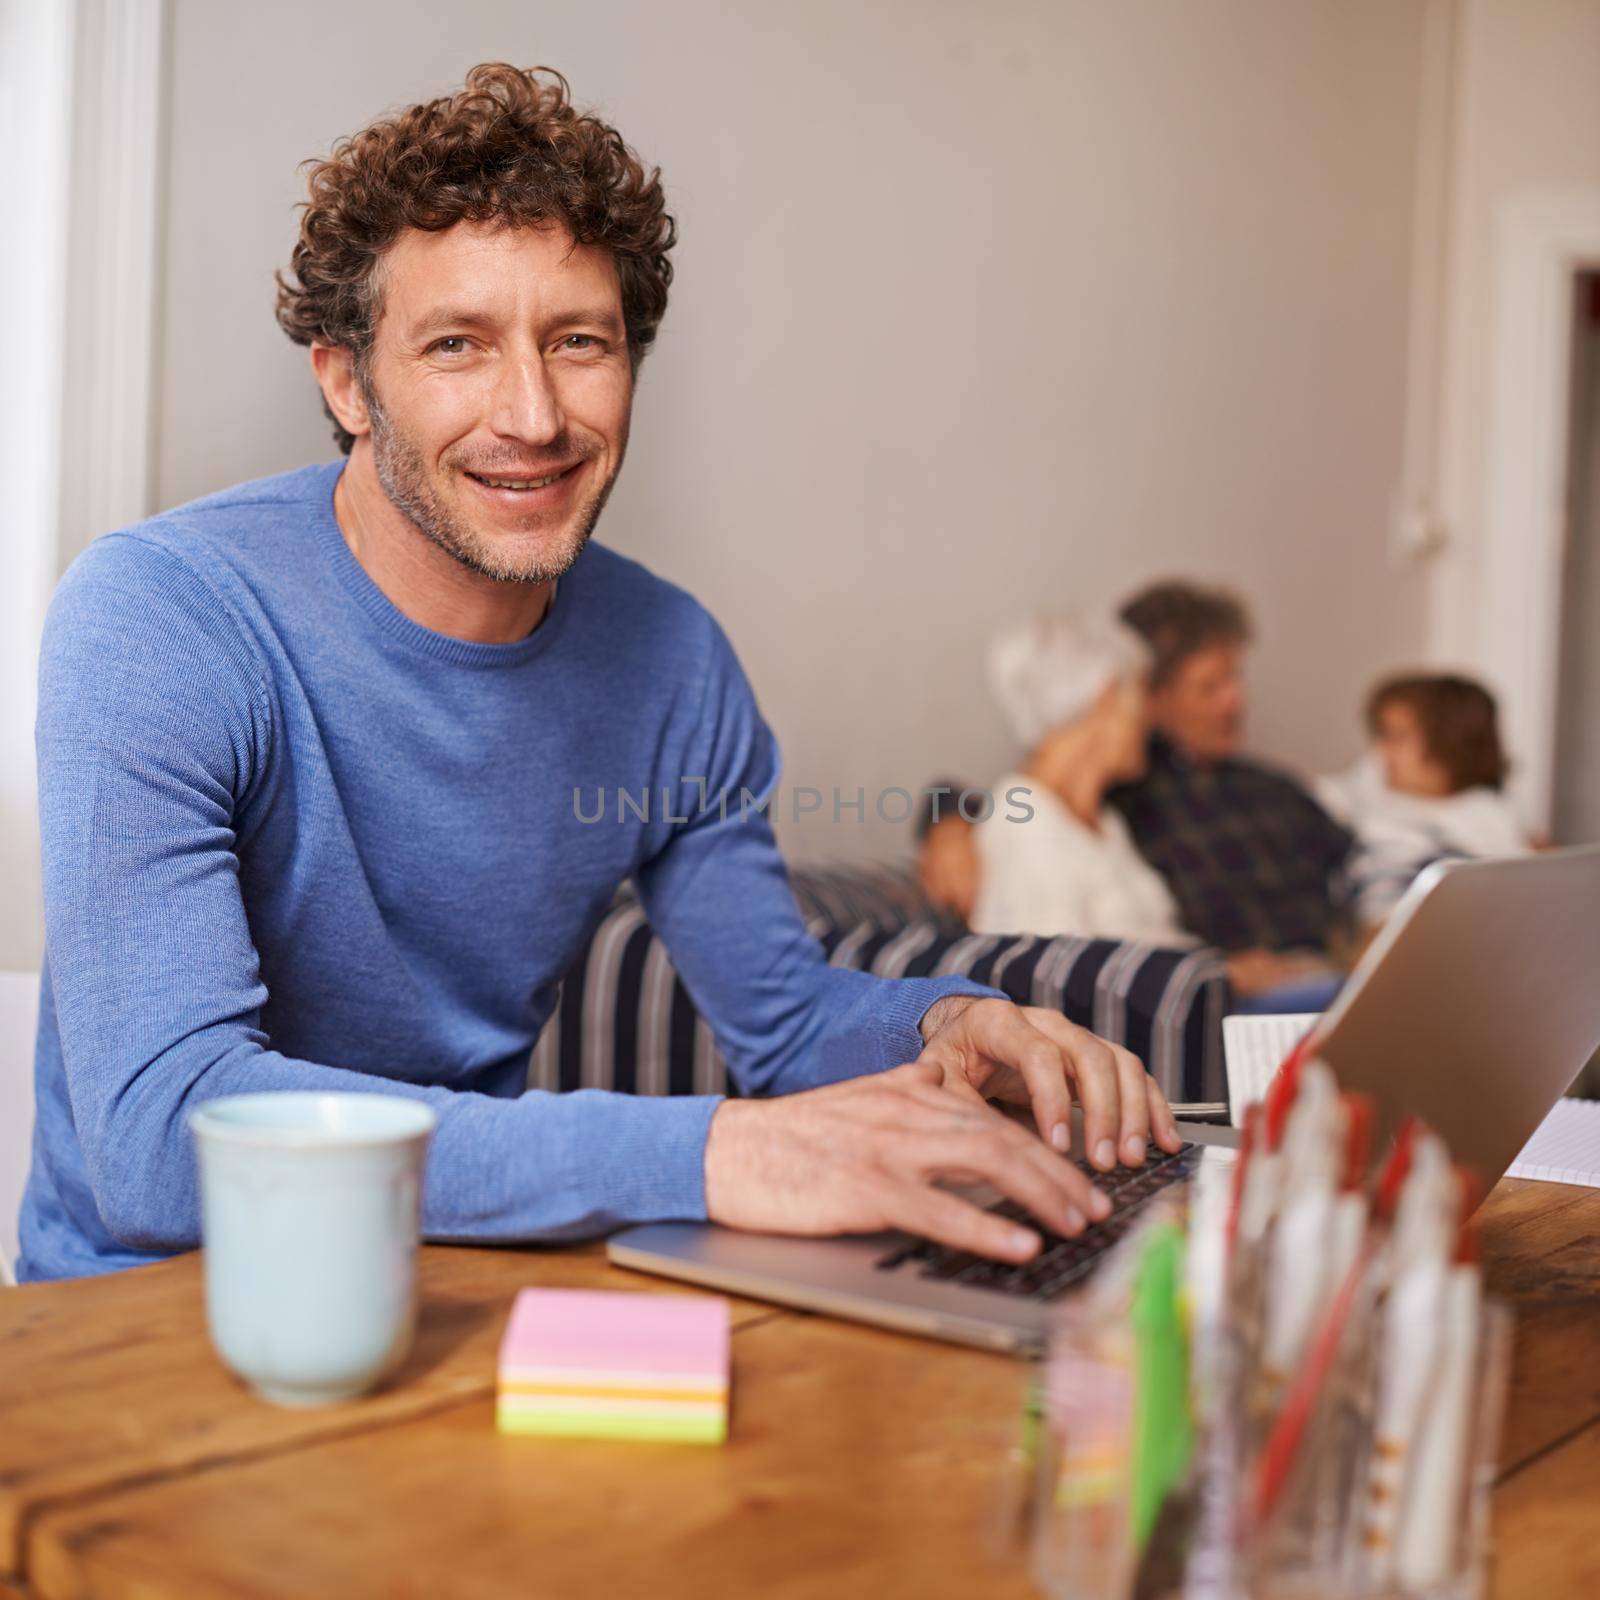 Balancing family and work. Portrait of a handsome young man using a laptop with his family sitting in the background